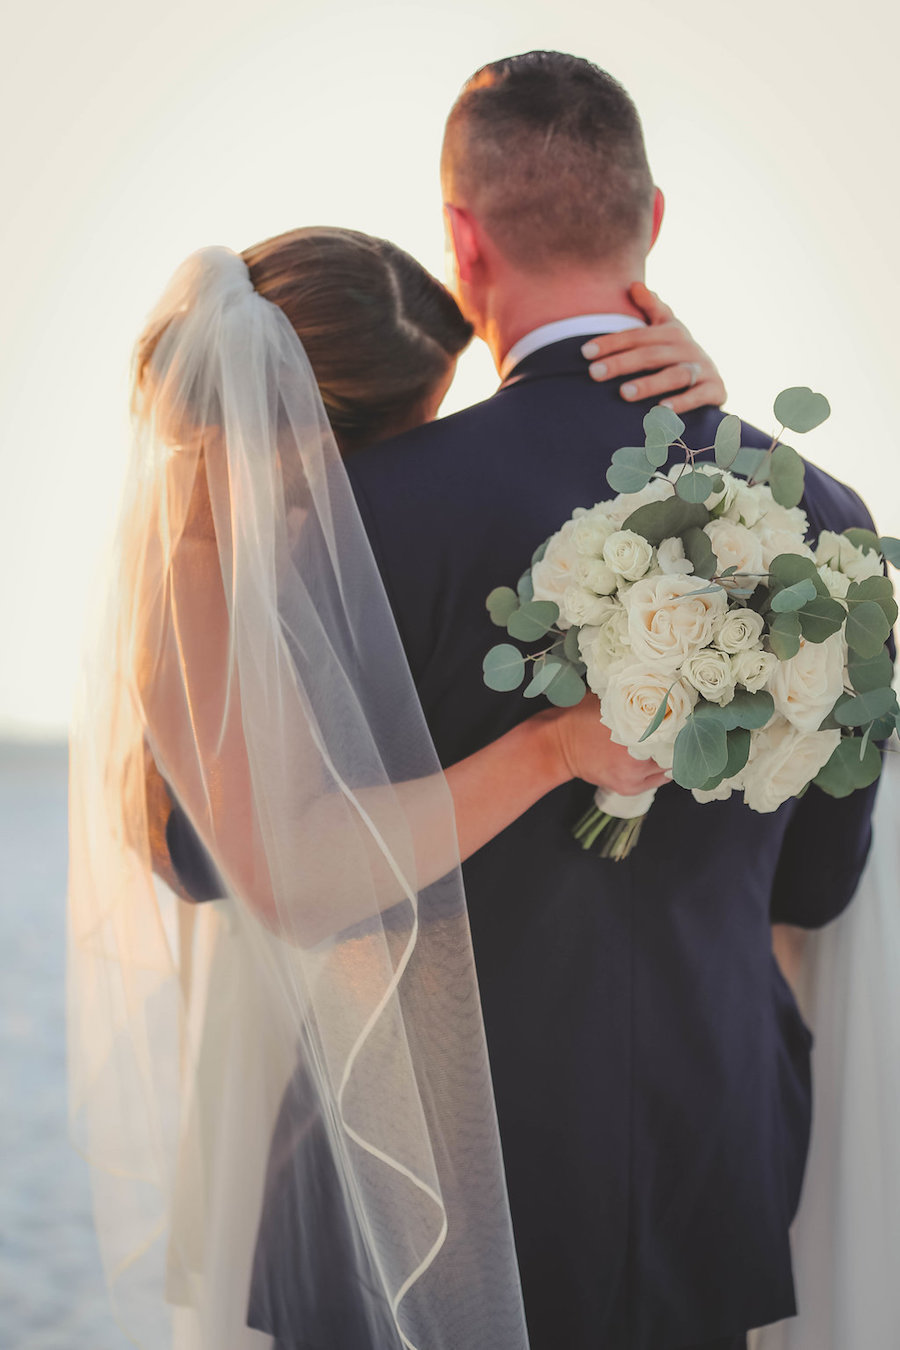 Bride and Groom Florida Beach Wedding Portrait with White Rose and Greenery Bouquet and Navy Suit | Tampa Bay Wedding